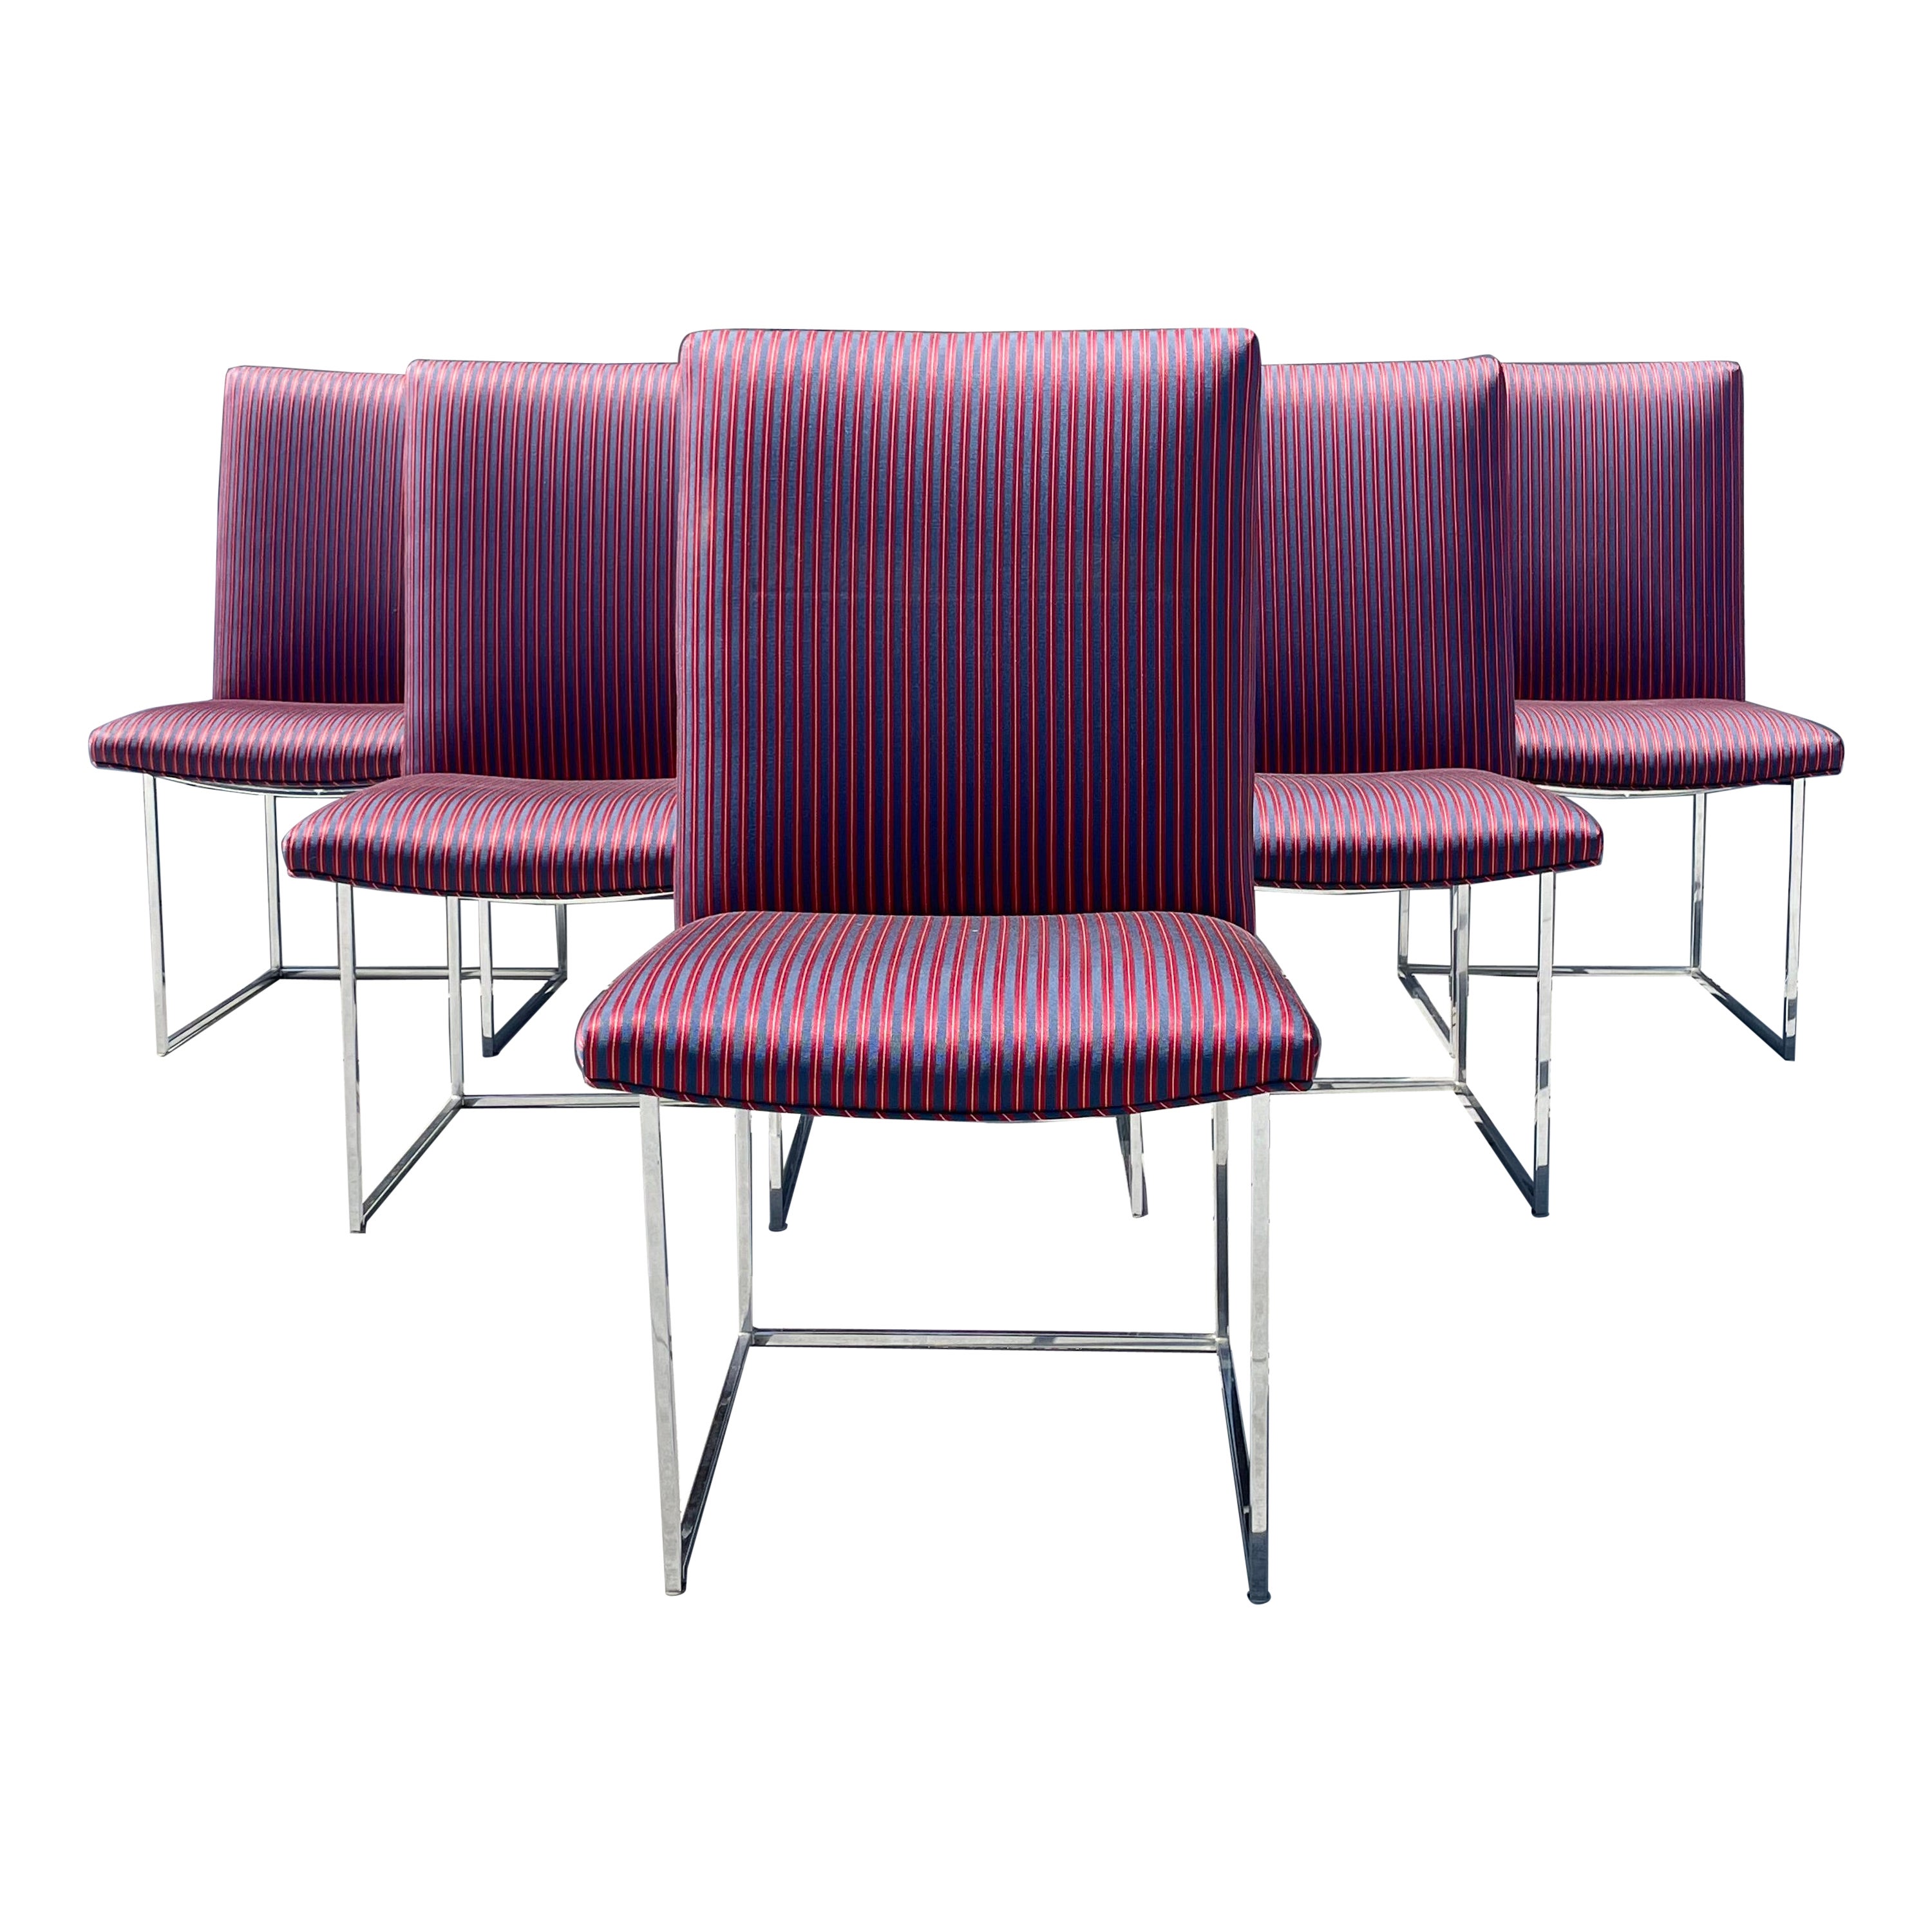 1970s Vintage Chrome Dining Chairs by Milo Buaghman for Thayer Coggin - Set of 6 For Sale